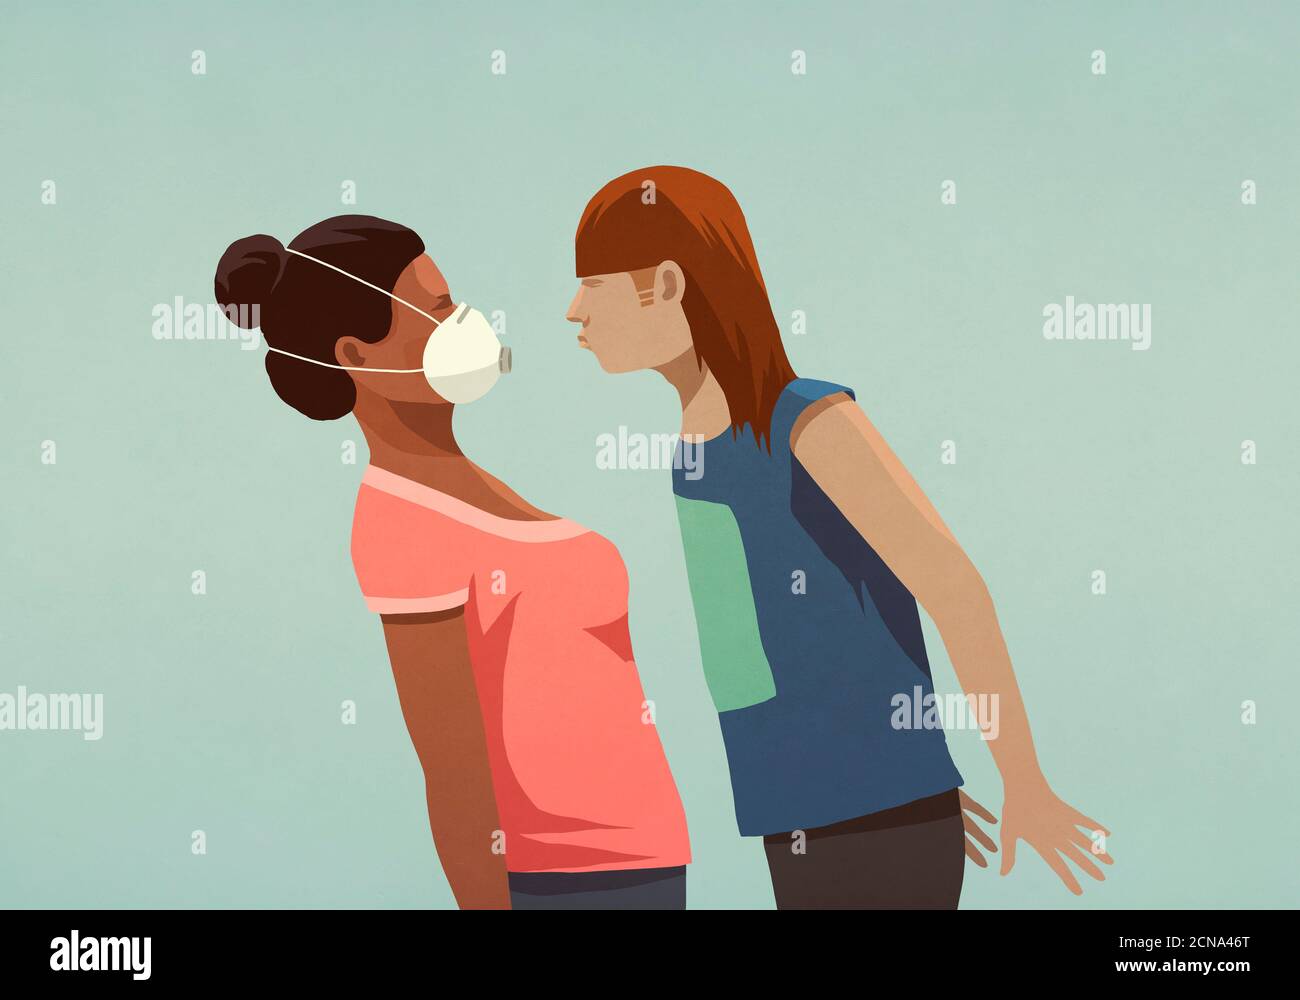 Aggressive woman confronting woman in face mask Stock Photo